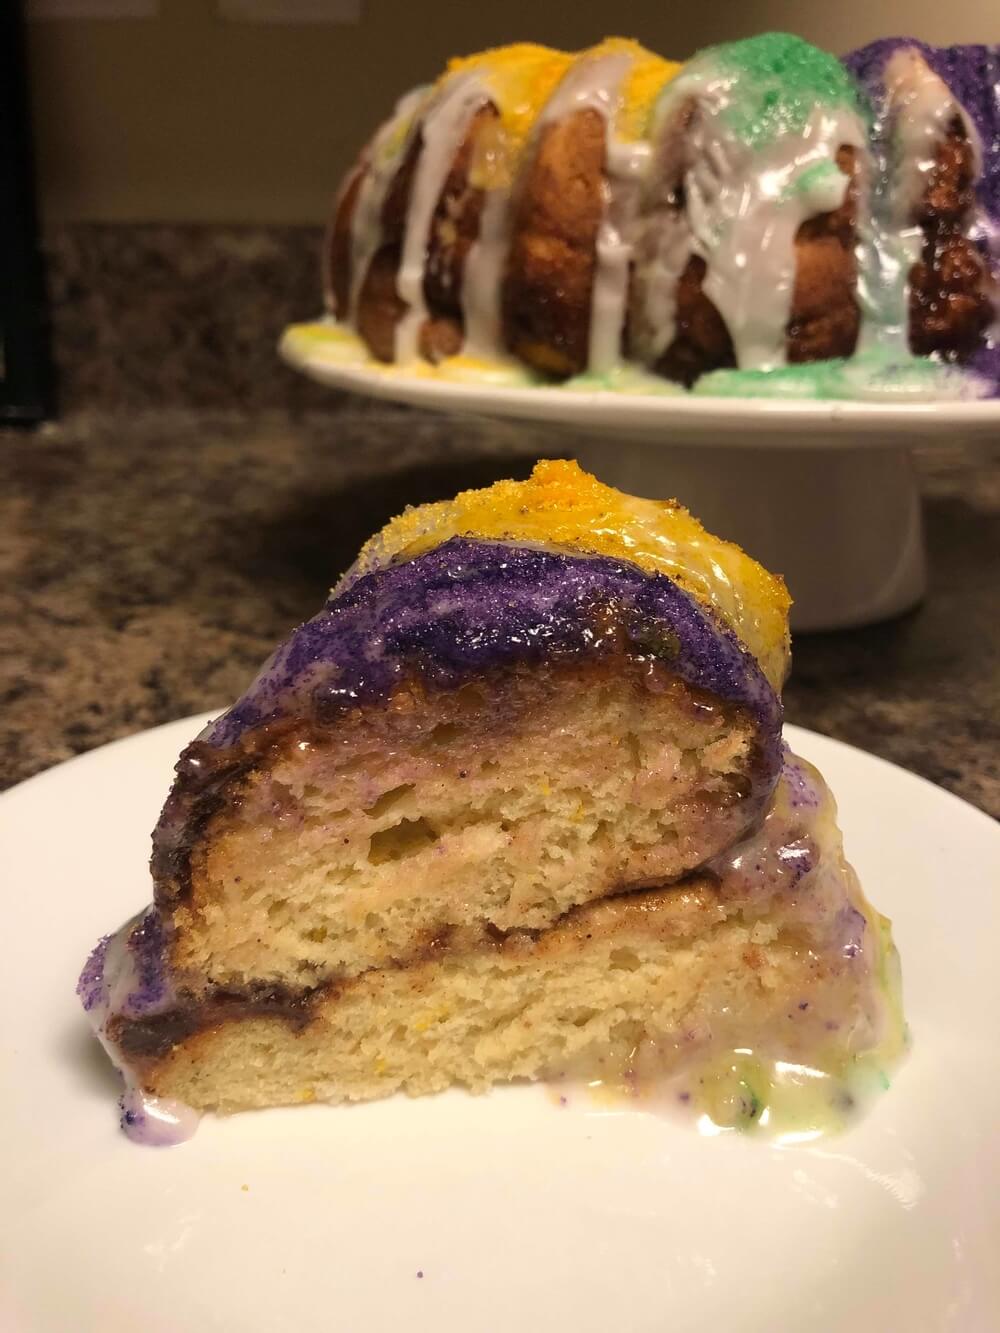 The Gluten Free King Cake Recipe Even You Can Bake - Northshore Parent